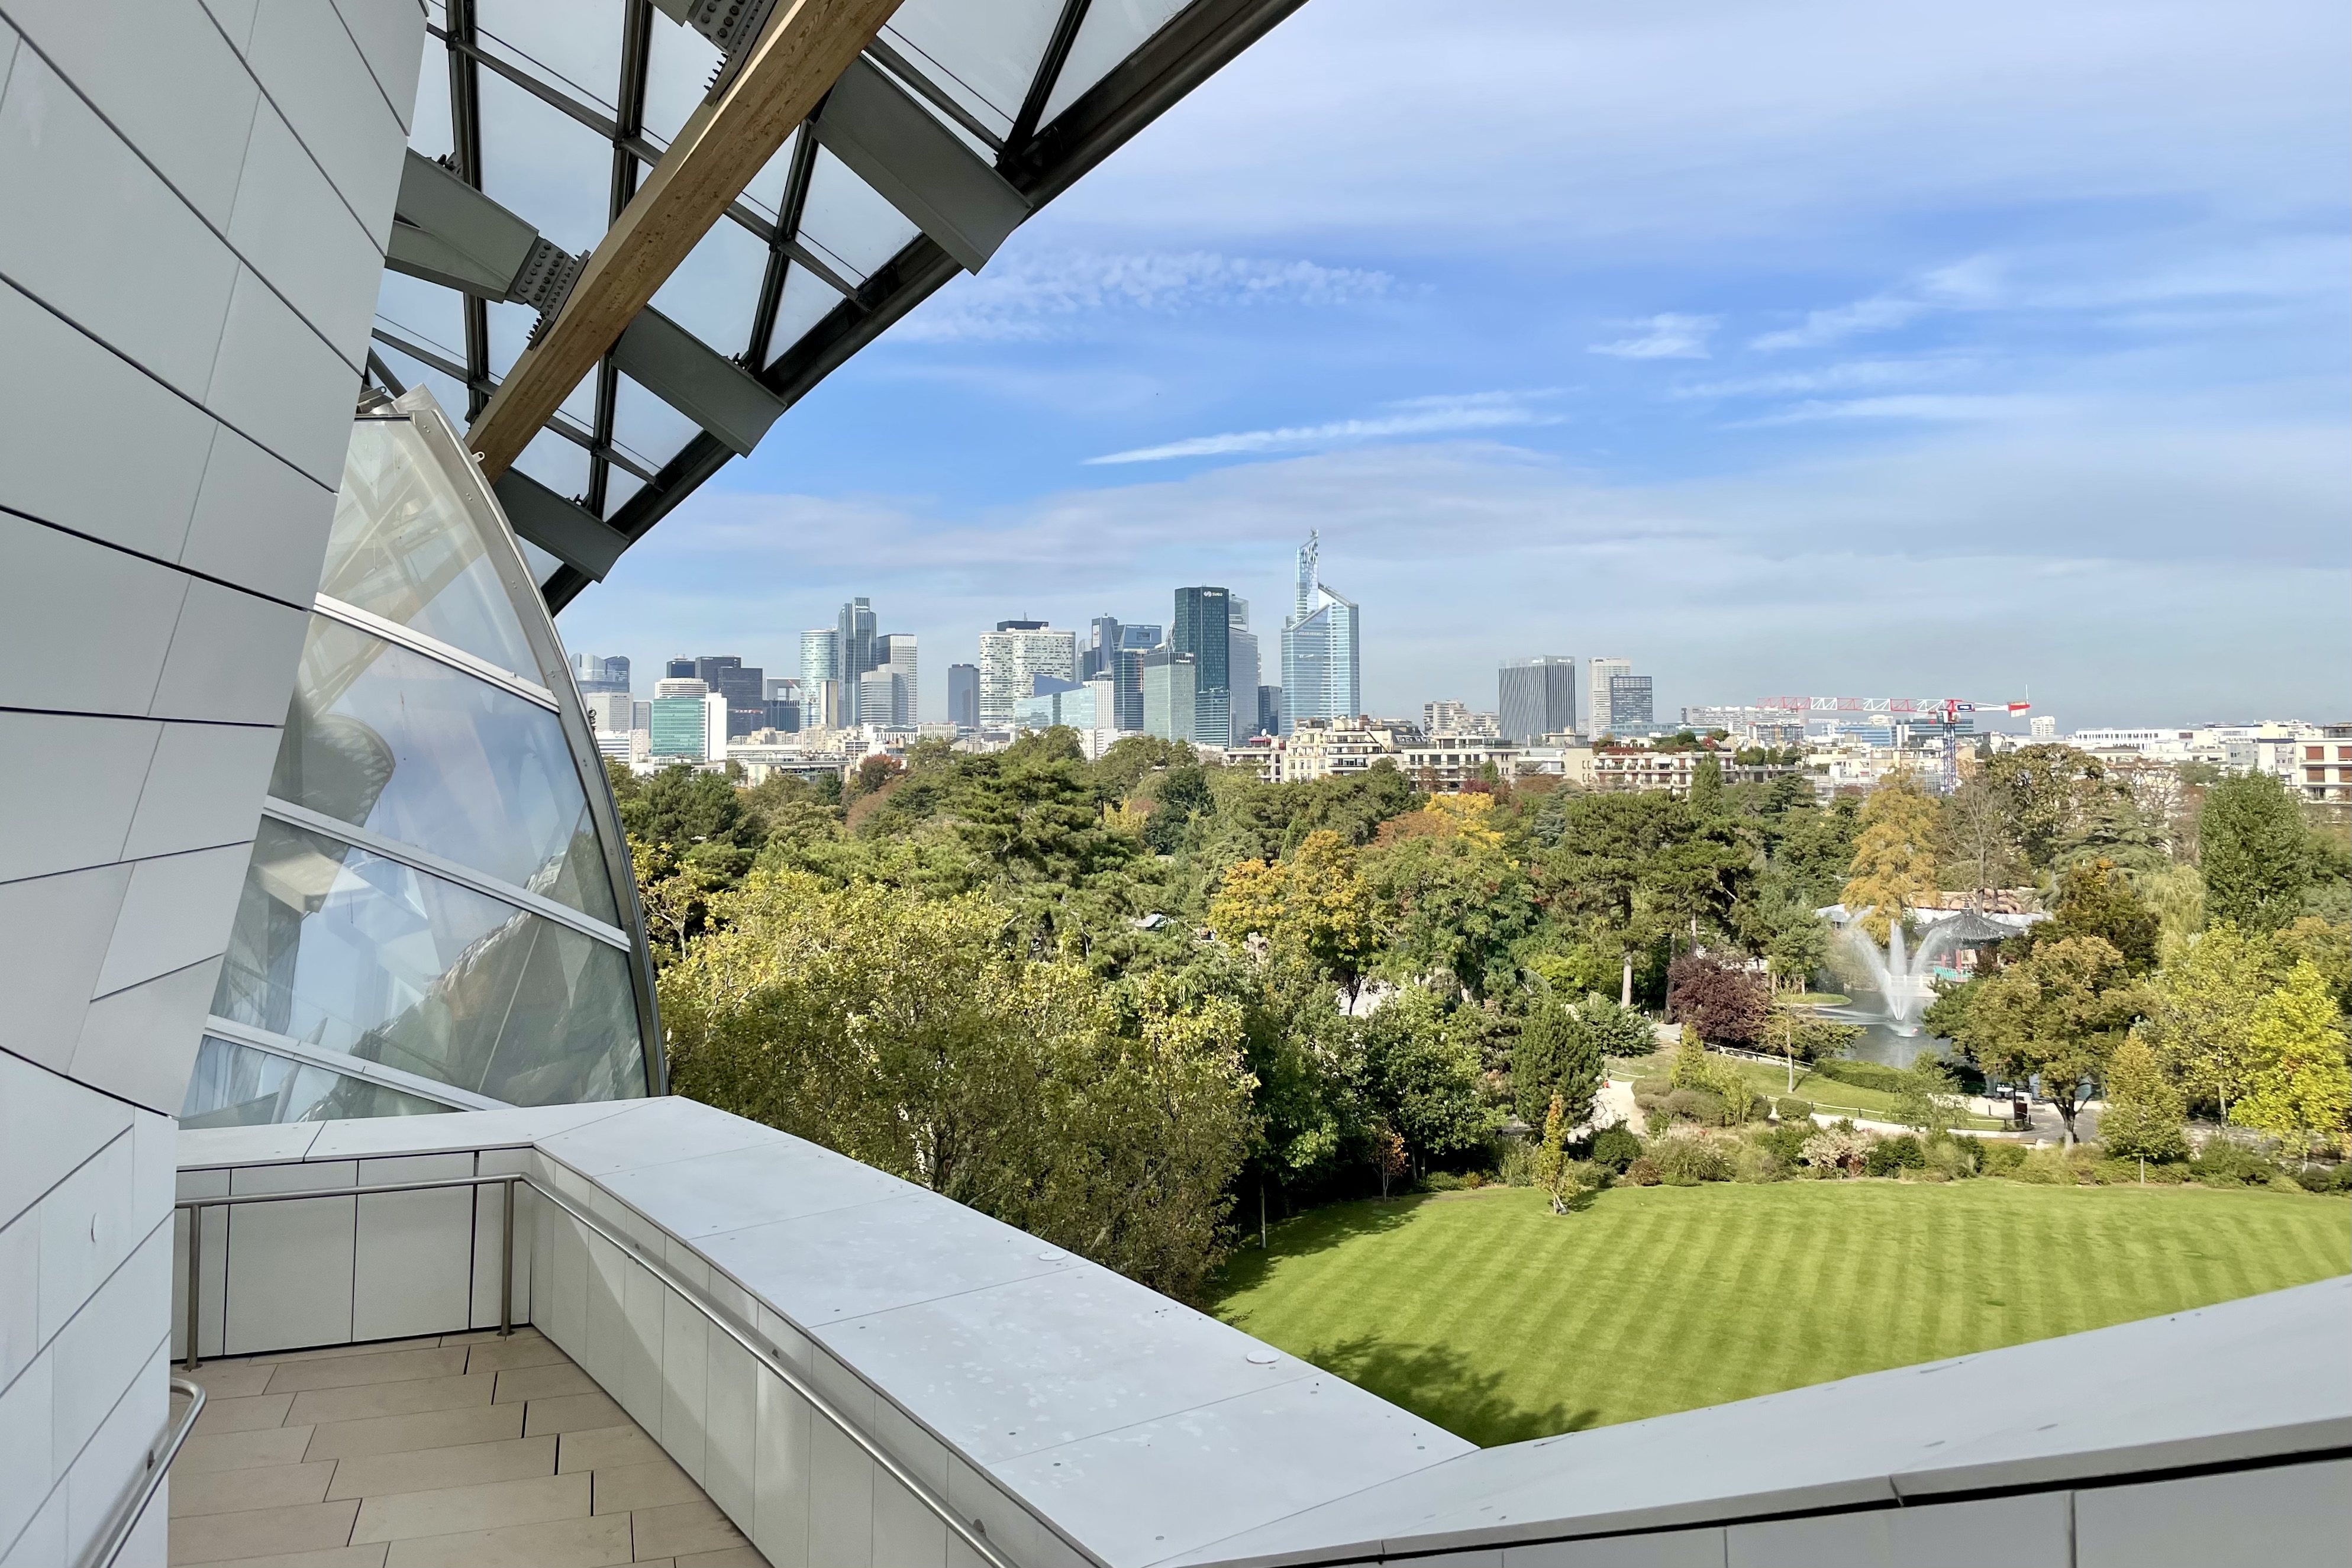 Louis Vuitton Foundation: number of visitors France 2016-2017